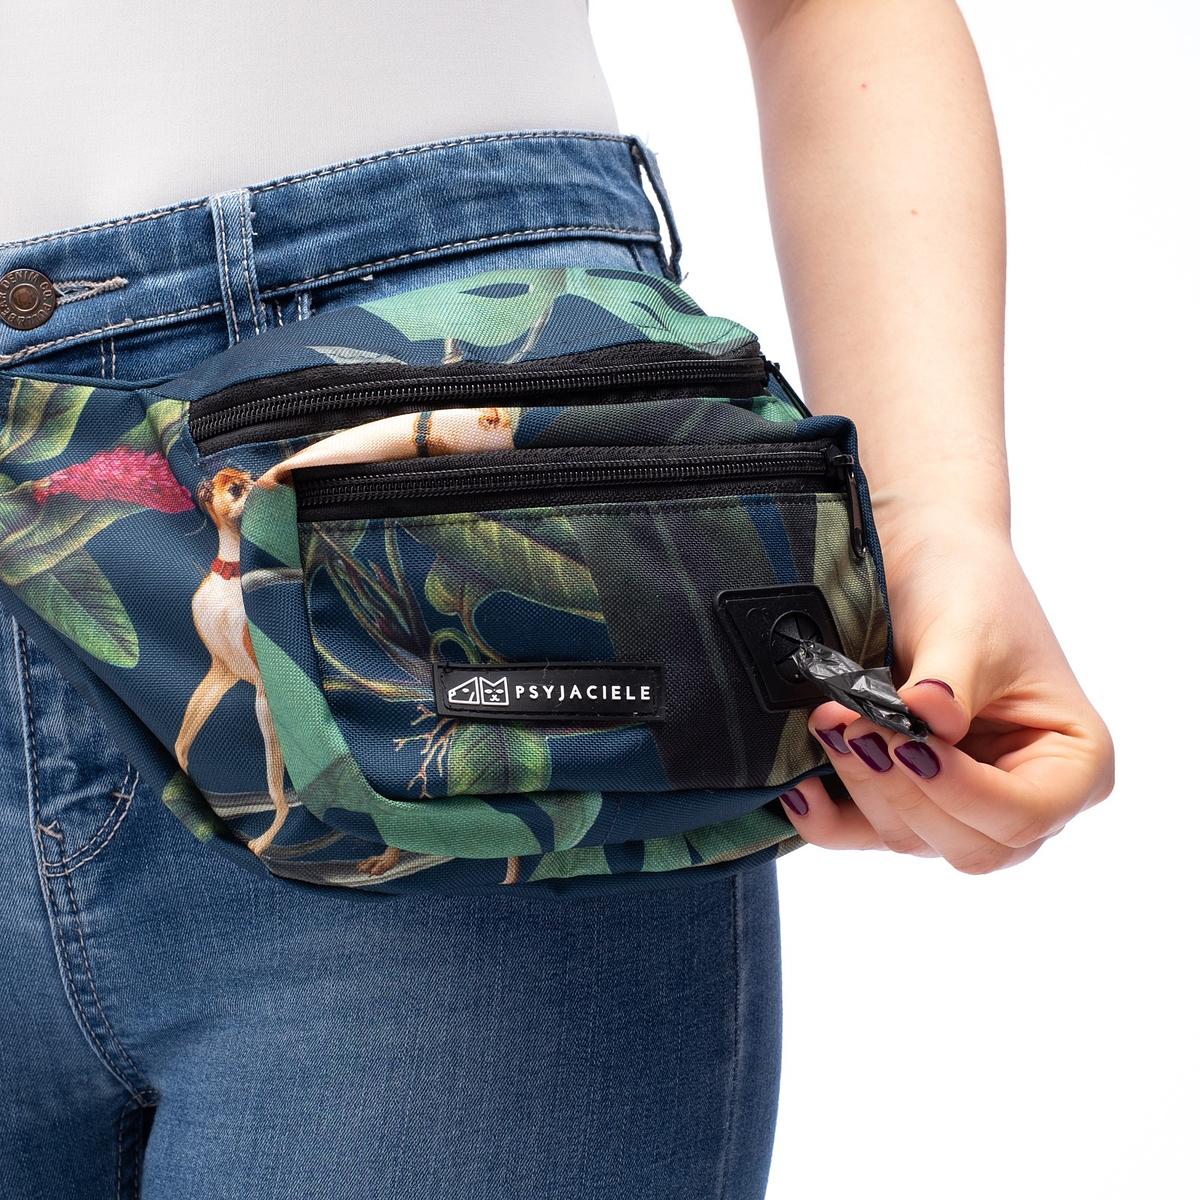 Fanny pack "Dogollage"